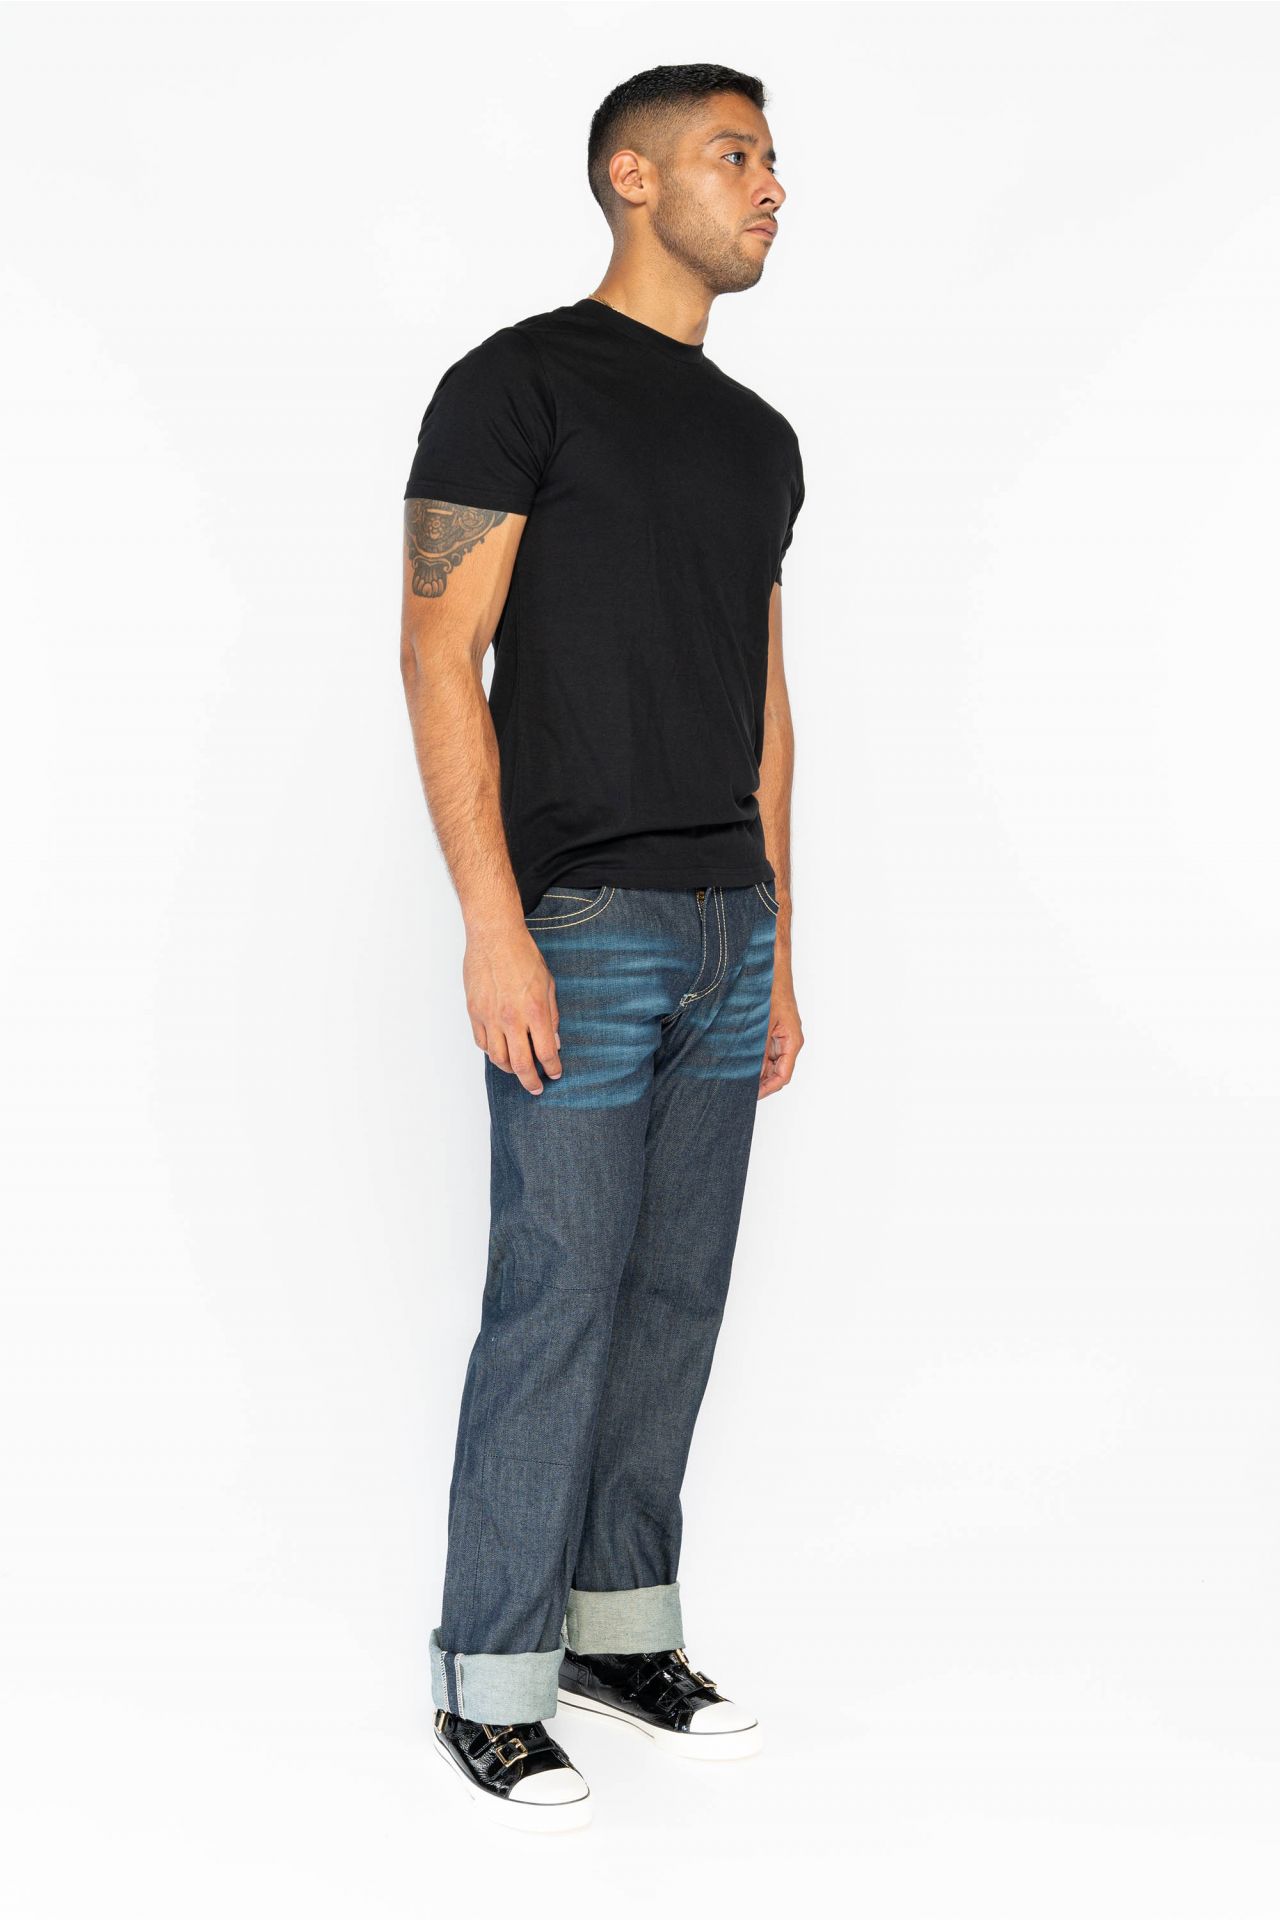 RAW DENIM COLLECTION MENS BOOTCUT SANDED JEANS WITH EMBROIDERY AND HEAVY CONTRAST STITCHING